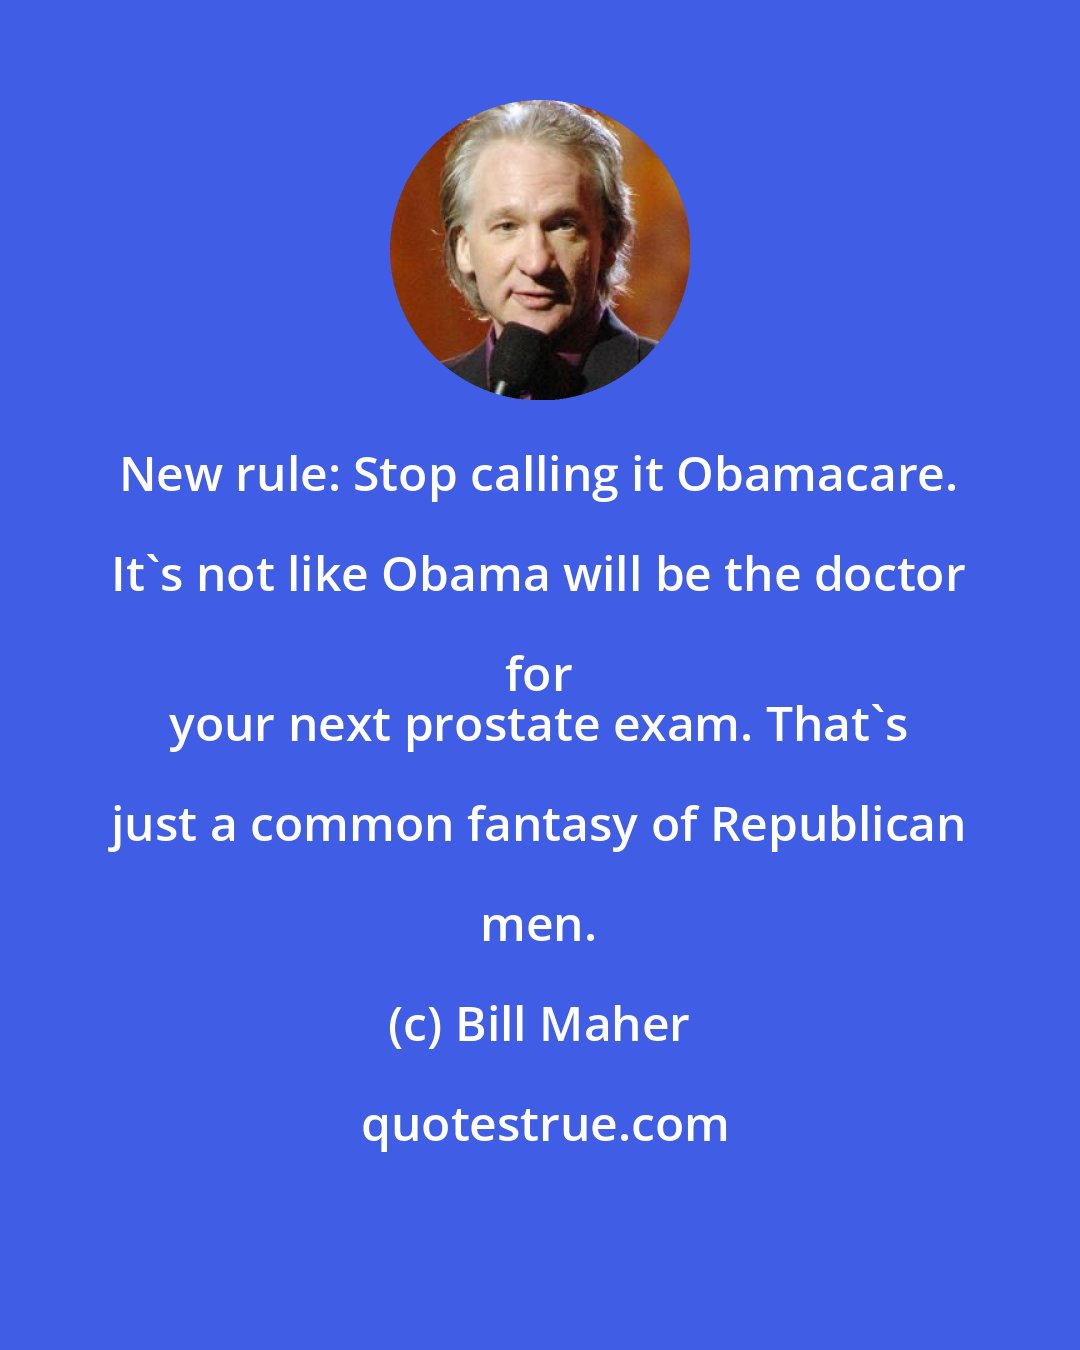 Bill Maher: New rule: Stop calling it Obamacare. It's not like Obama will be the doctor for 
 your next prostate exam. That's just a common fantasy of Republican men.